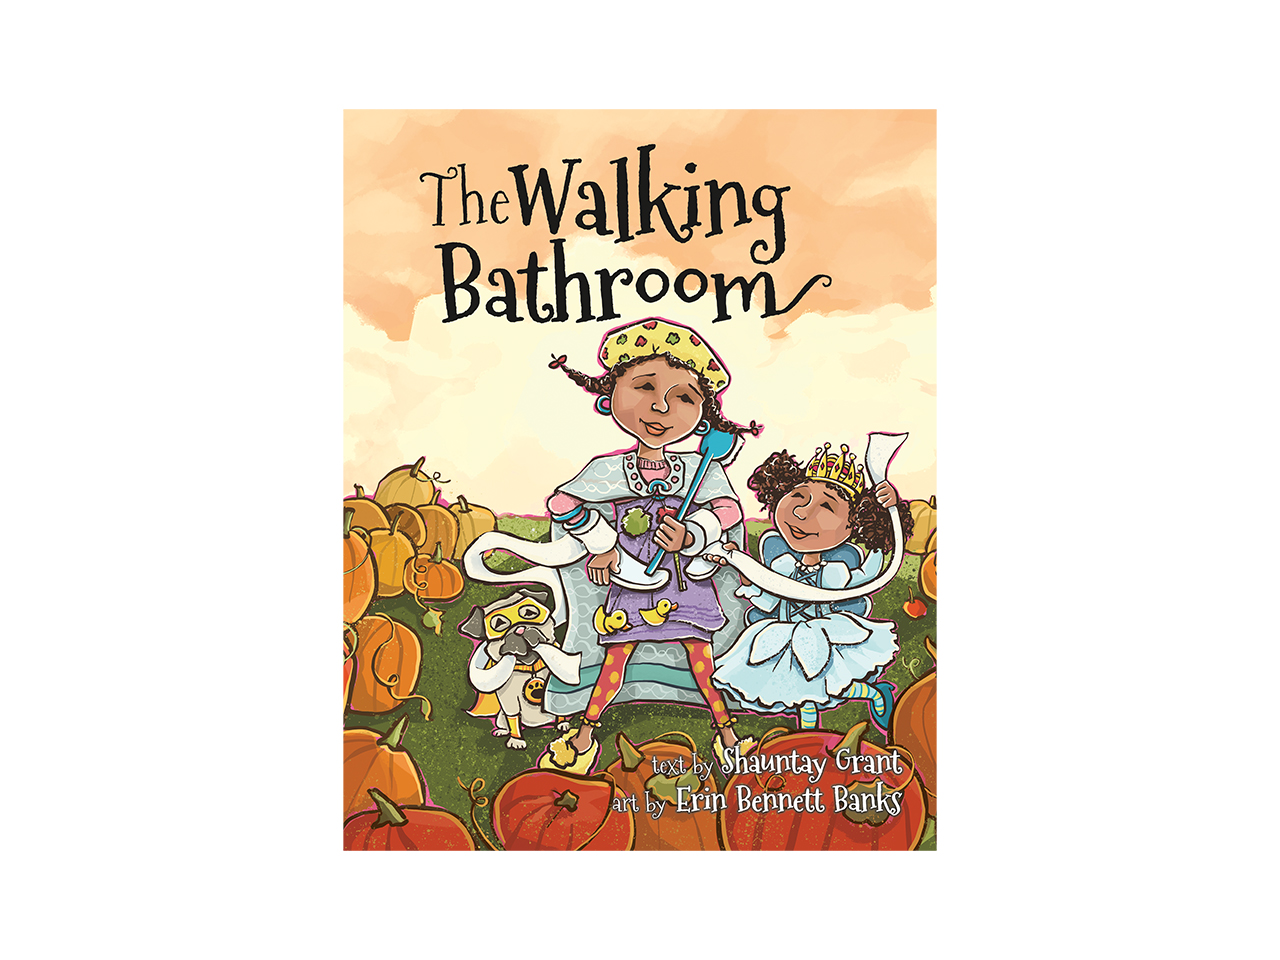 Cover art for the Walking Bathroom showing two illustrated kids dressed up in costumes walking through a pumpkin patch